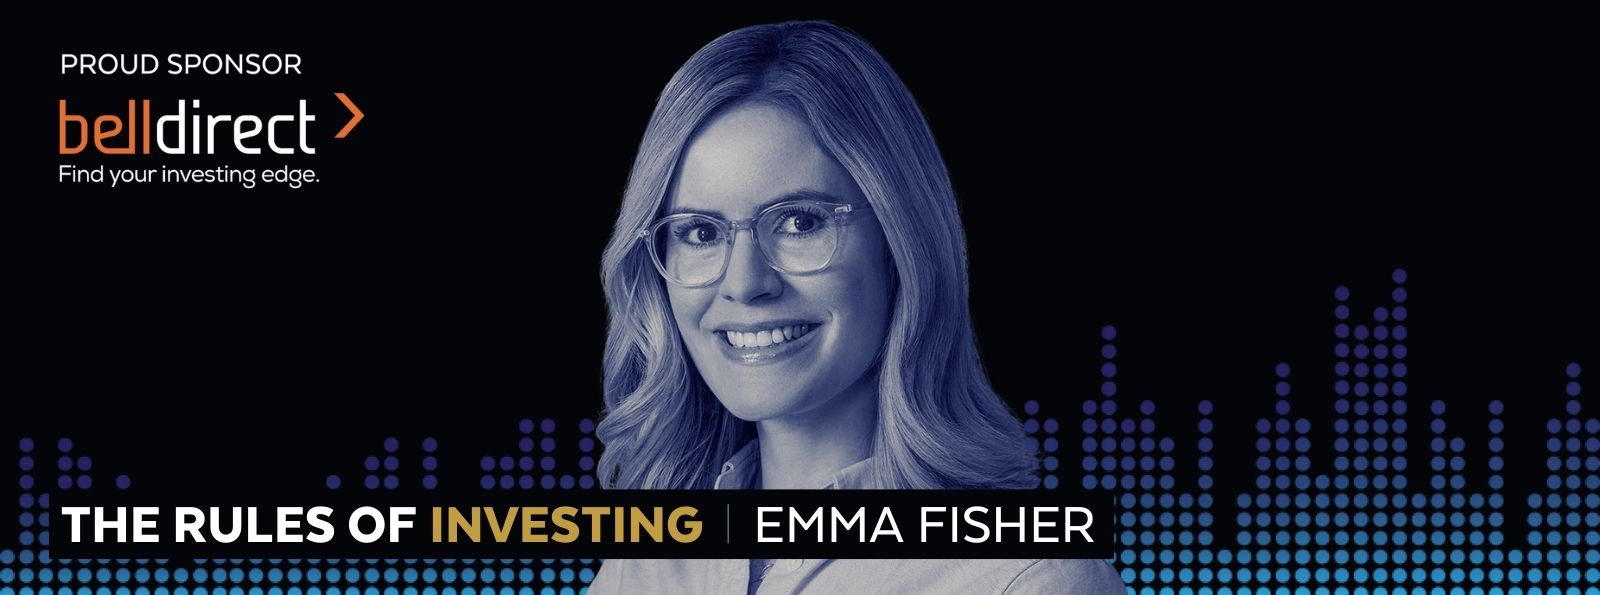 Airlie Funds Management's Emma Fisher 